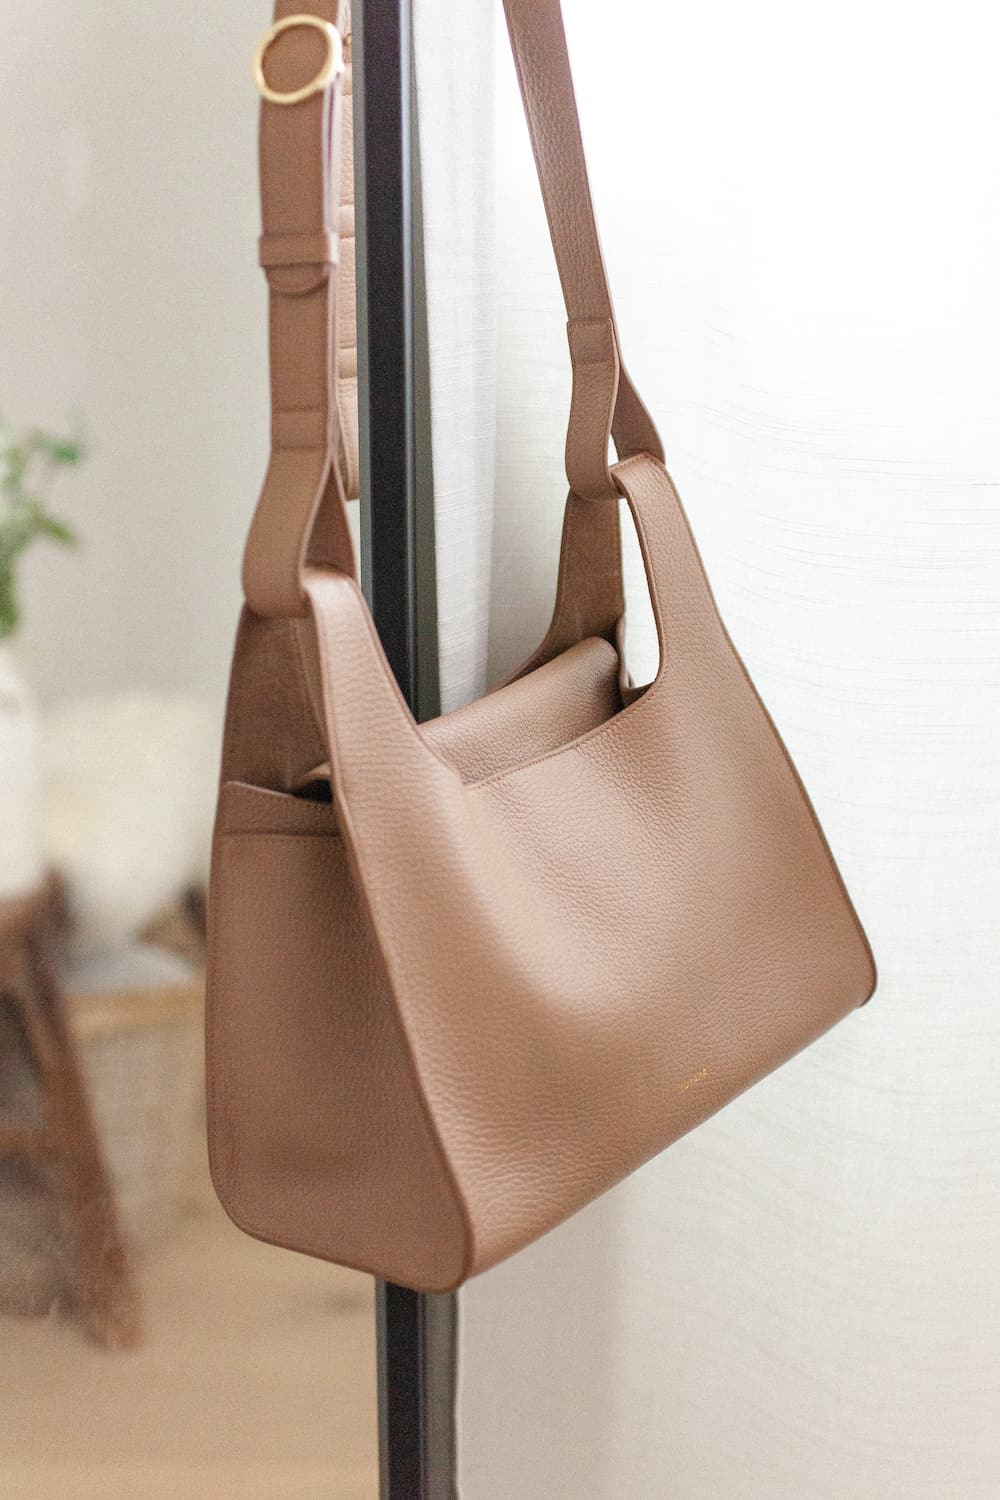 image of a brown leather Cuyana double loop bag hanging on a black framed mirror